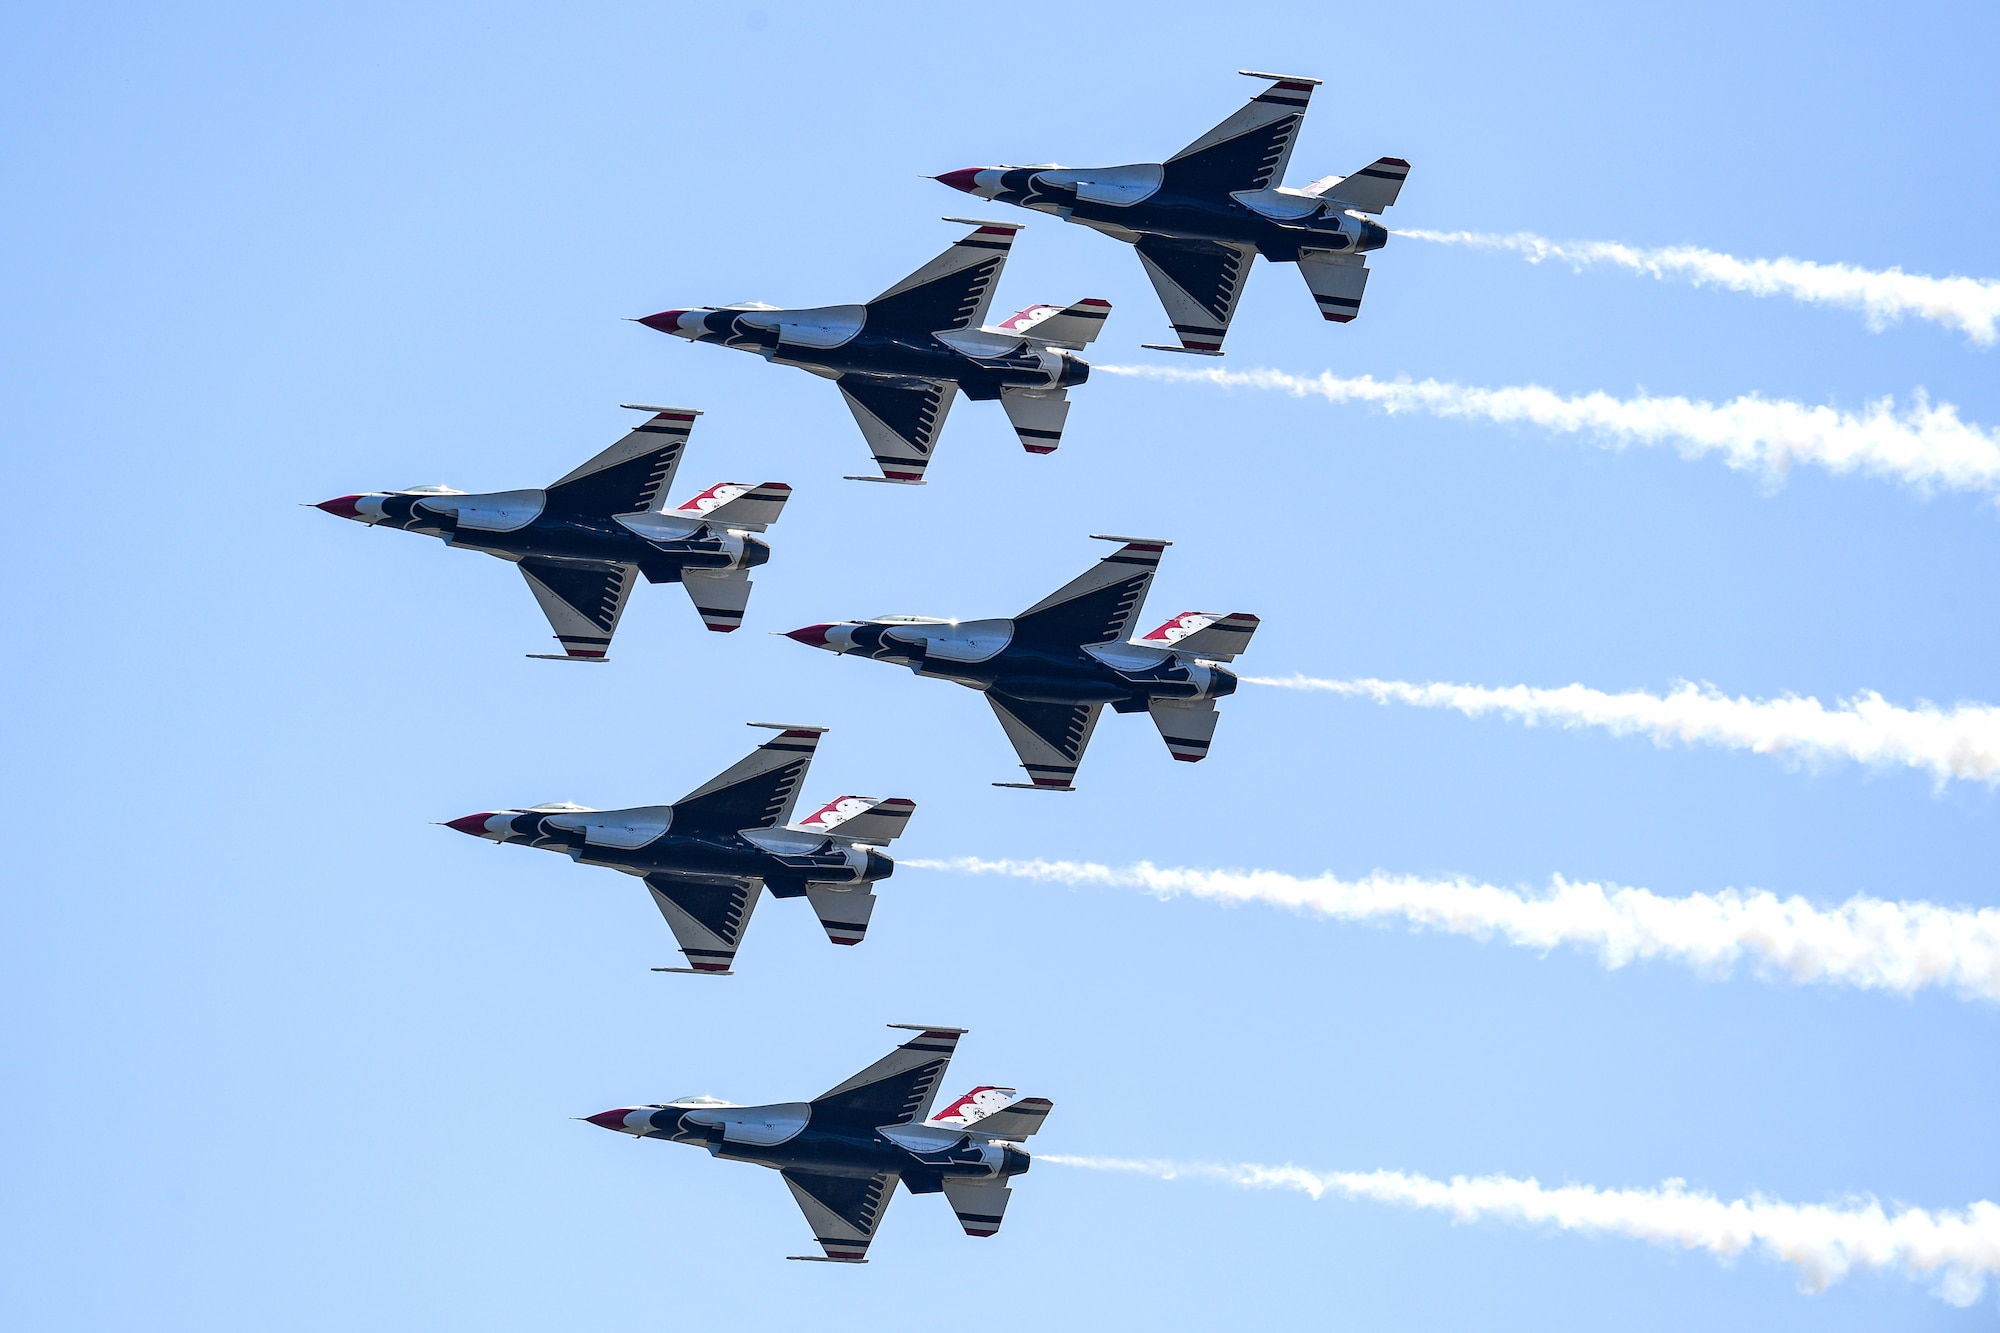 The Thunderbirds fly during a practice session for the 2023 Thunder Over the Sound Air and Space Show at Biloxi Beach in Biloxi, Mississippi, April 28, 2023. Thunder Over the Sound is a unique event where a military installation and its surrounding city jointly host an air show in two locations; Biloxi Beach and Keesler's flightline. (U.S. Air Force photo by Kemberly Groue)